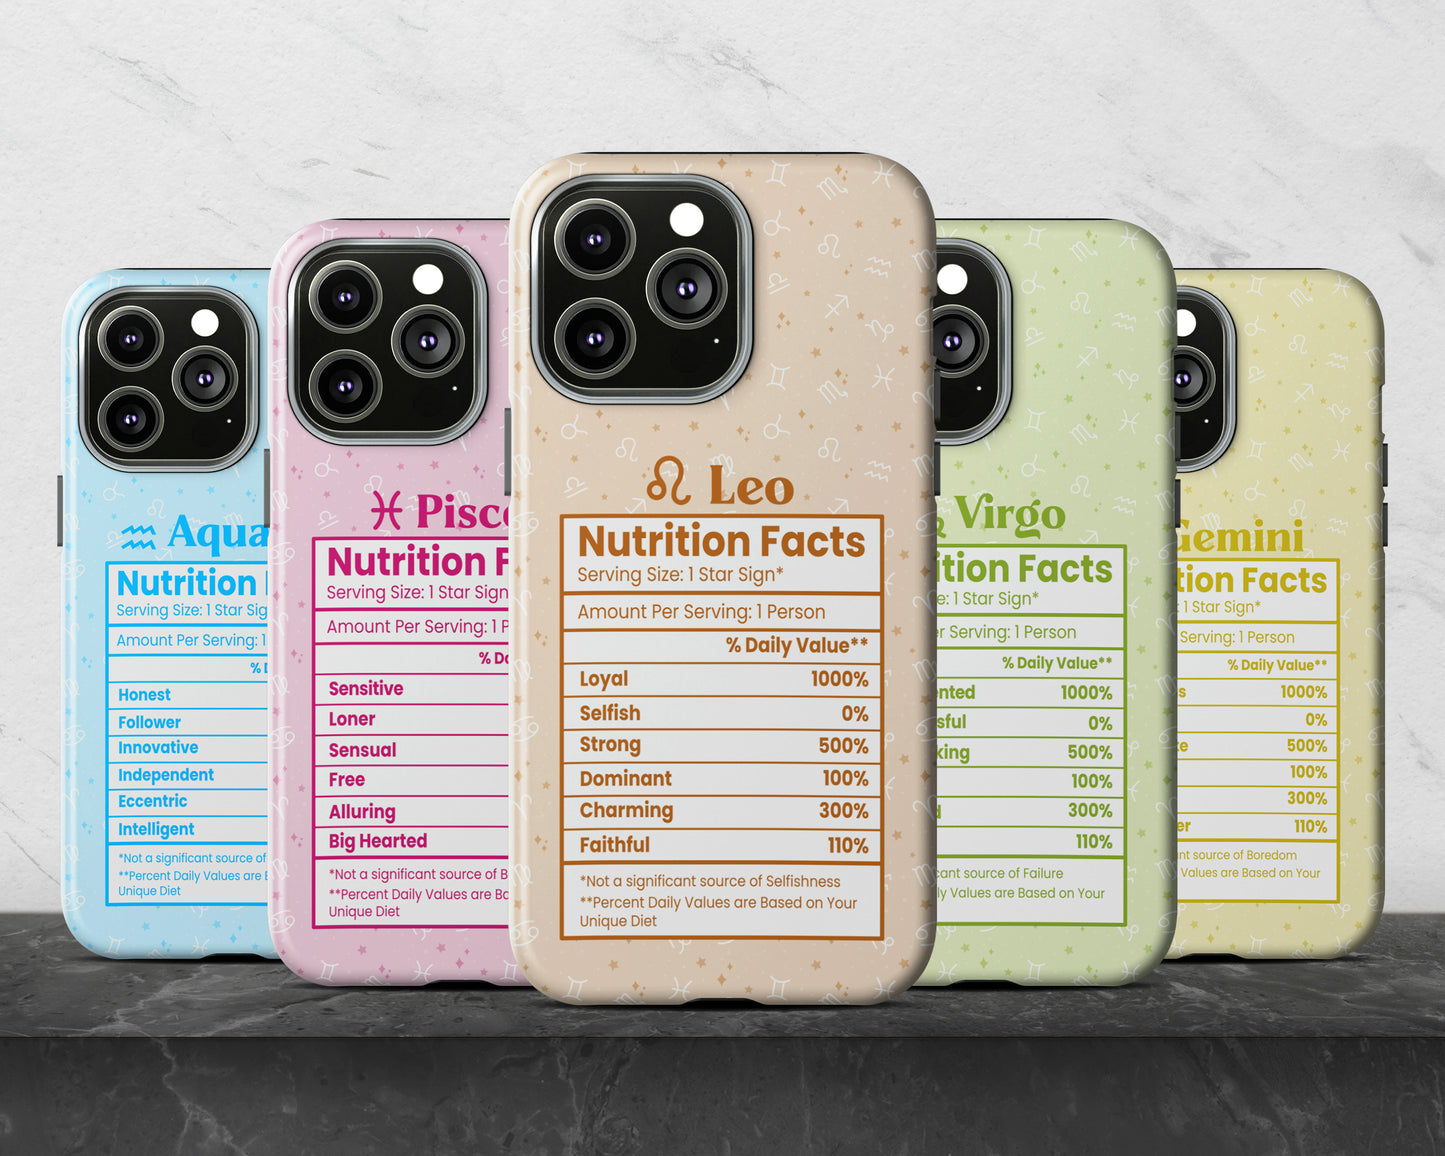 Cancer Zodiac sign nutrition facts label iPhone case